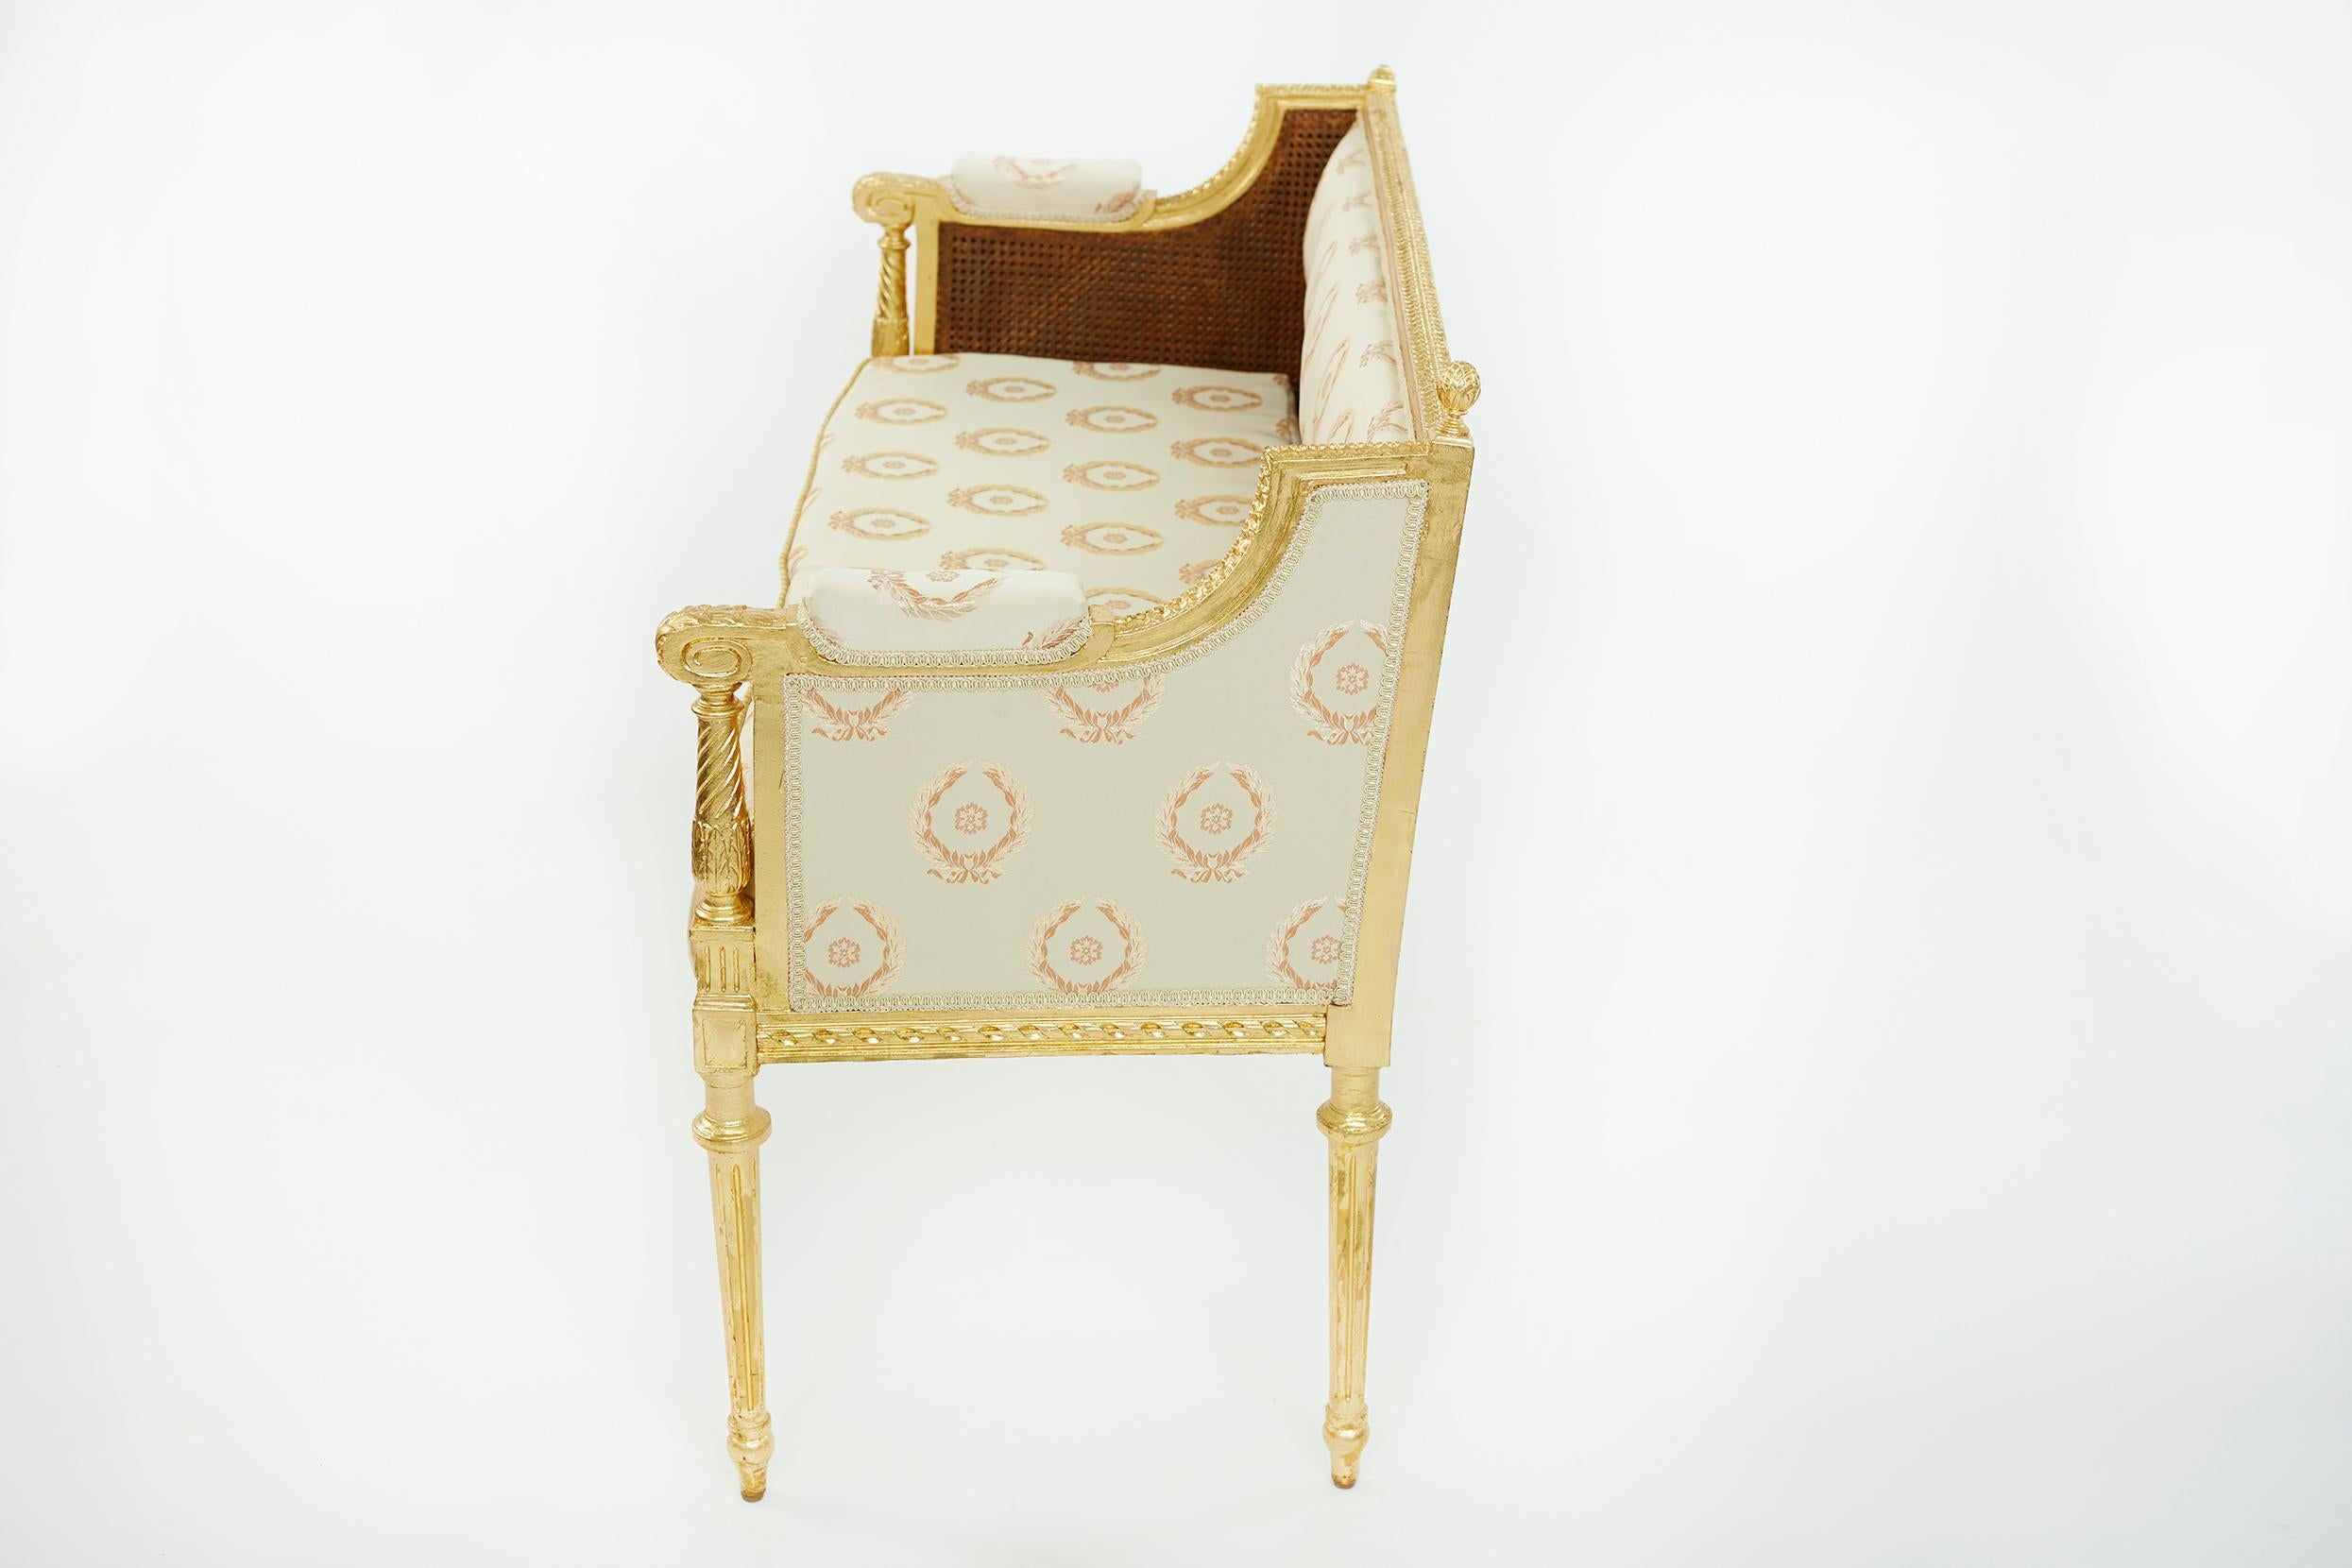 Beautiful Neoclassical style gilt wood framed hand carved settee with caning back panel. The seat is recovered with a cream damask upholstery with laurel wreath motif. The settee is in good condition with minor wear consistent with age / use. The